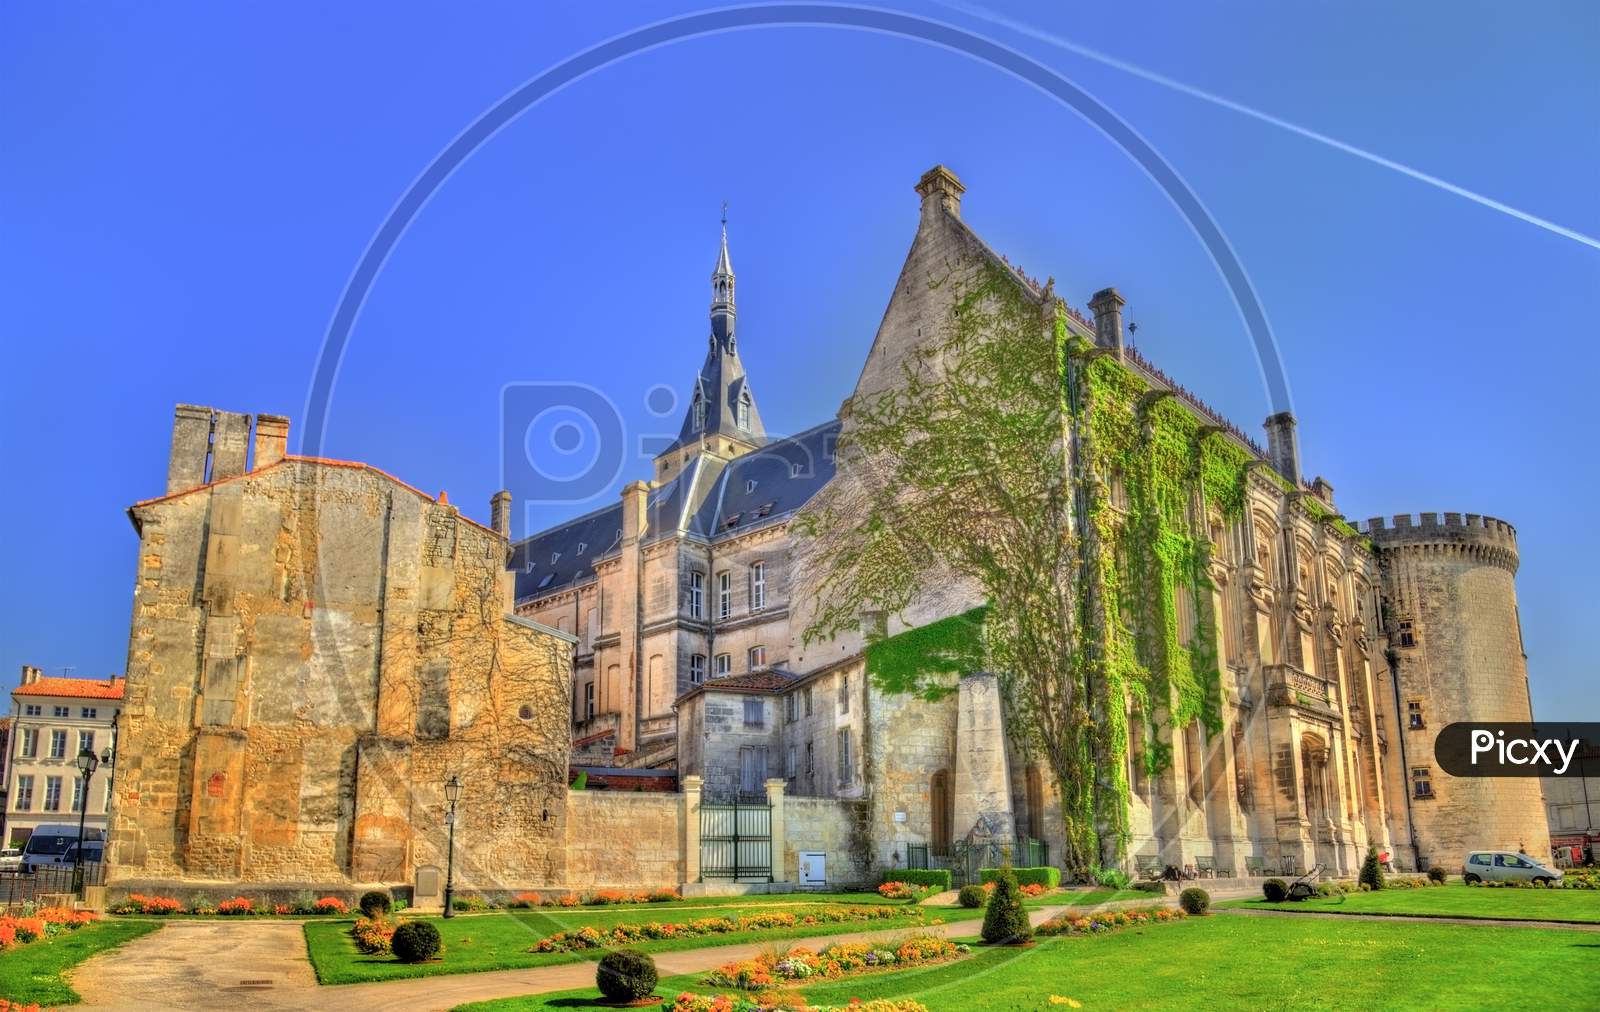 Town Hall Of Angouleme, An Ancient Castle - France